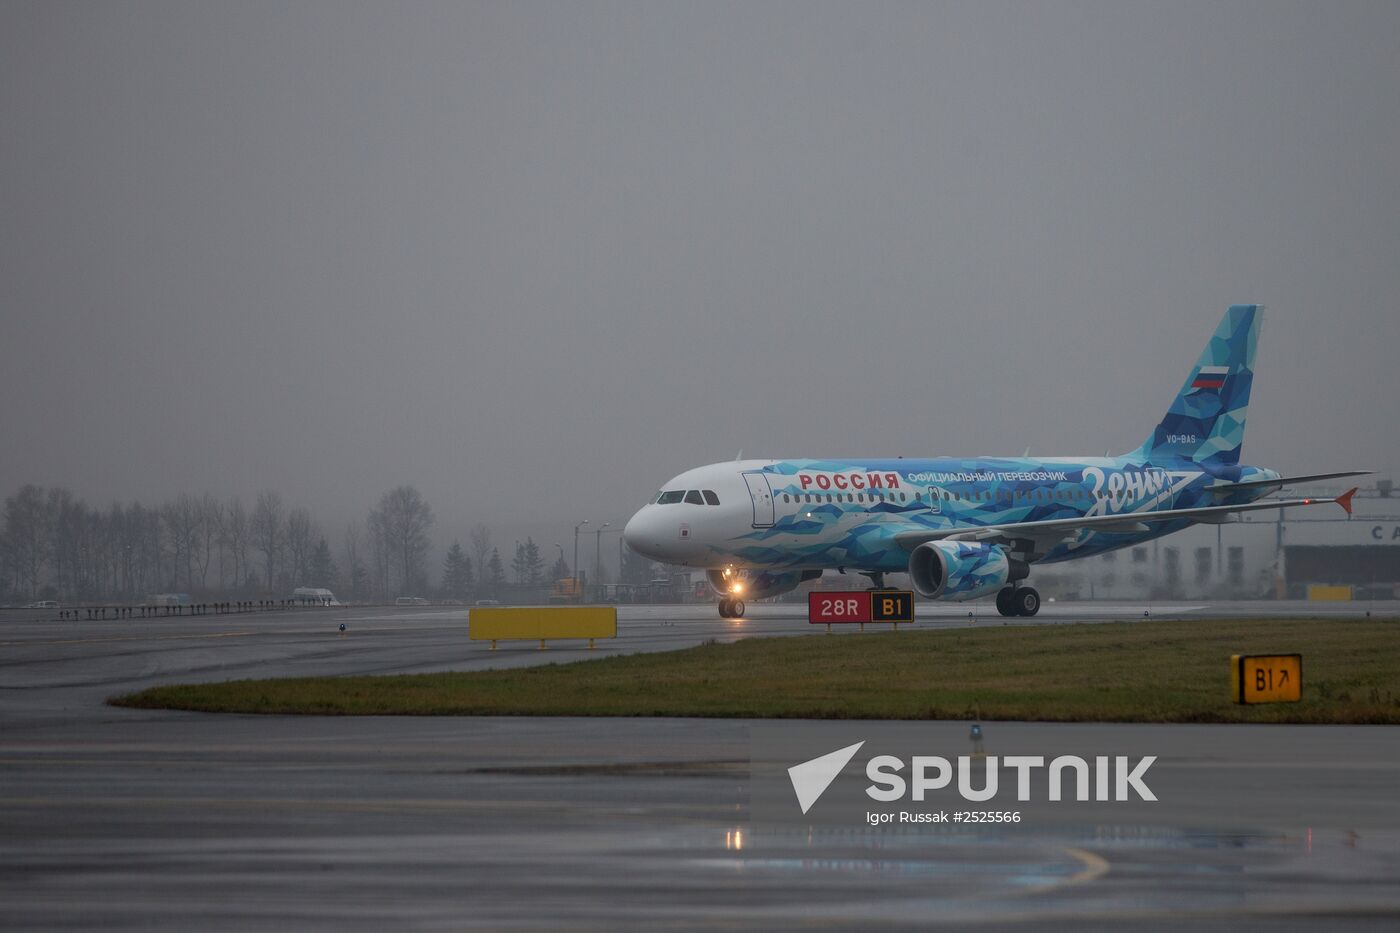 Presentation of new livery airplane for FC Zenit